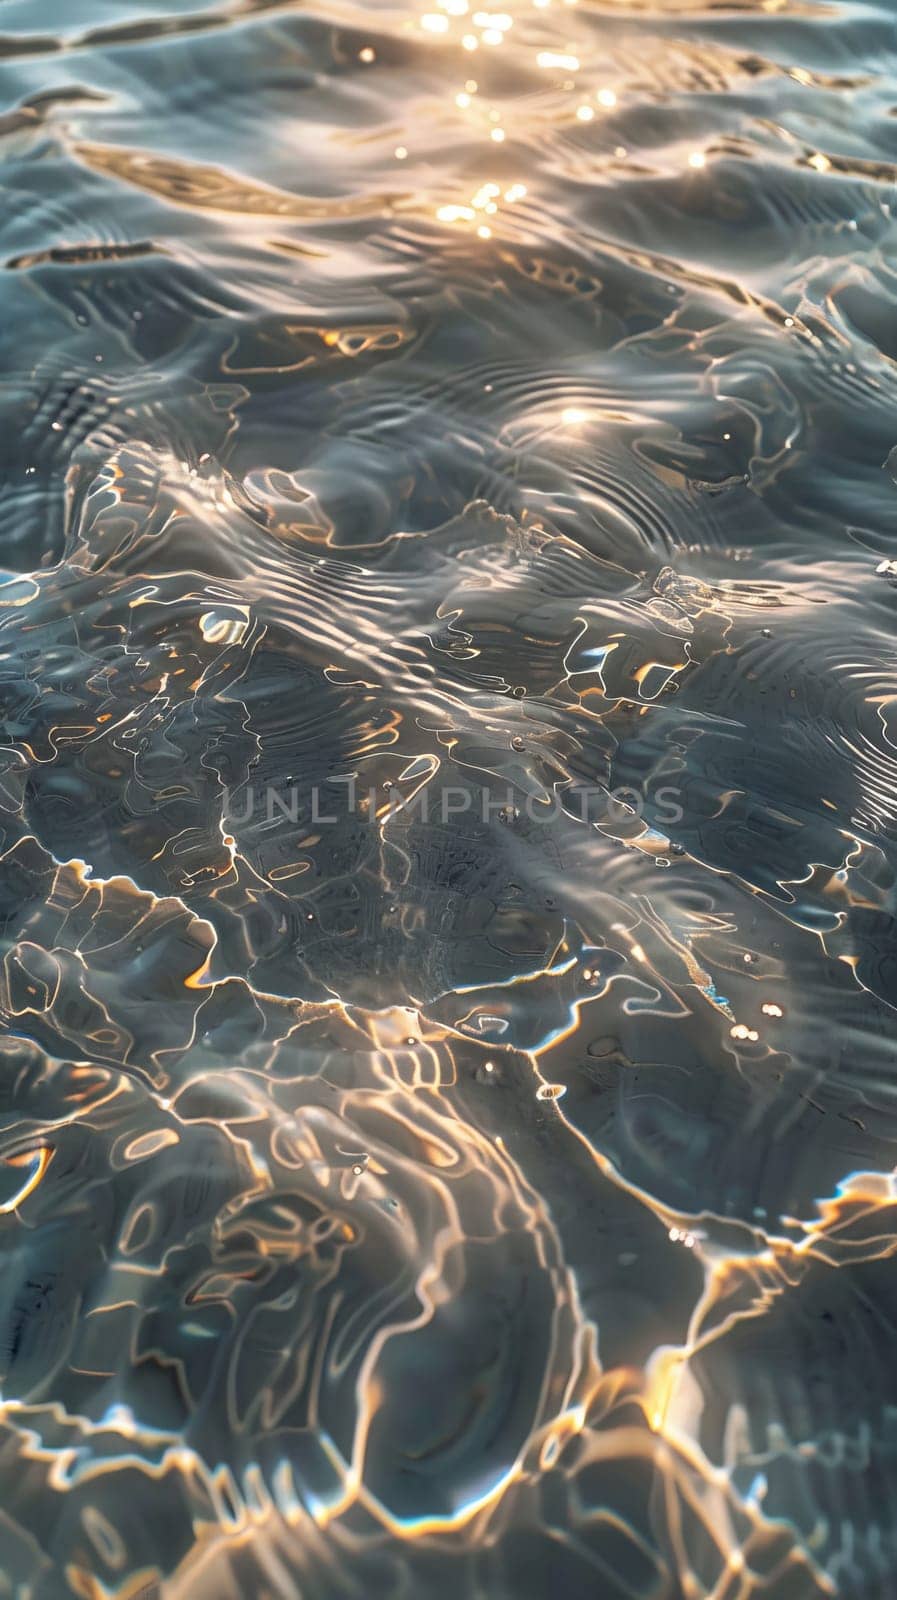 The water is reflecting the sun's rays, creating a beautiful and serene scene. The water is calm and still, with ripples forming around the rocks